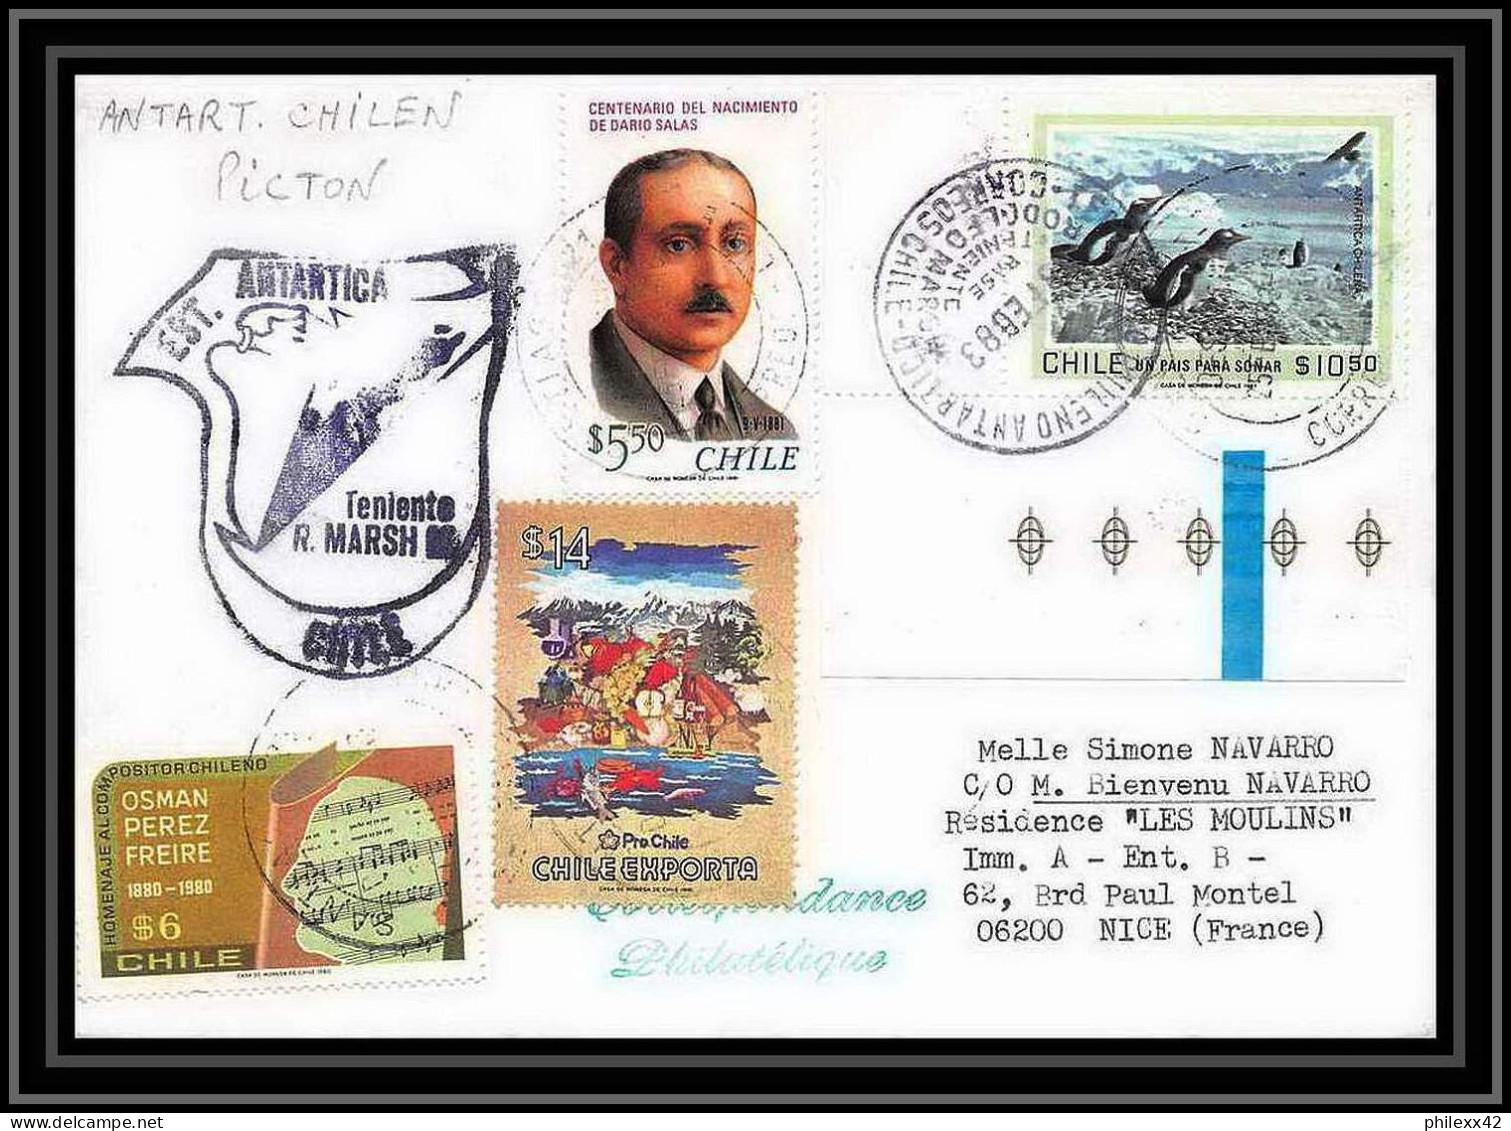 1917 Antarctic Chili (chile) Lettre (cover) Picton 9/2/1983 - Forschungsstationen